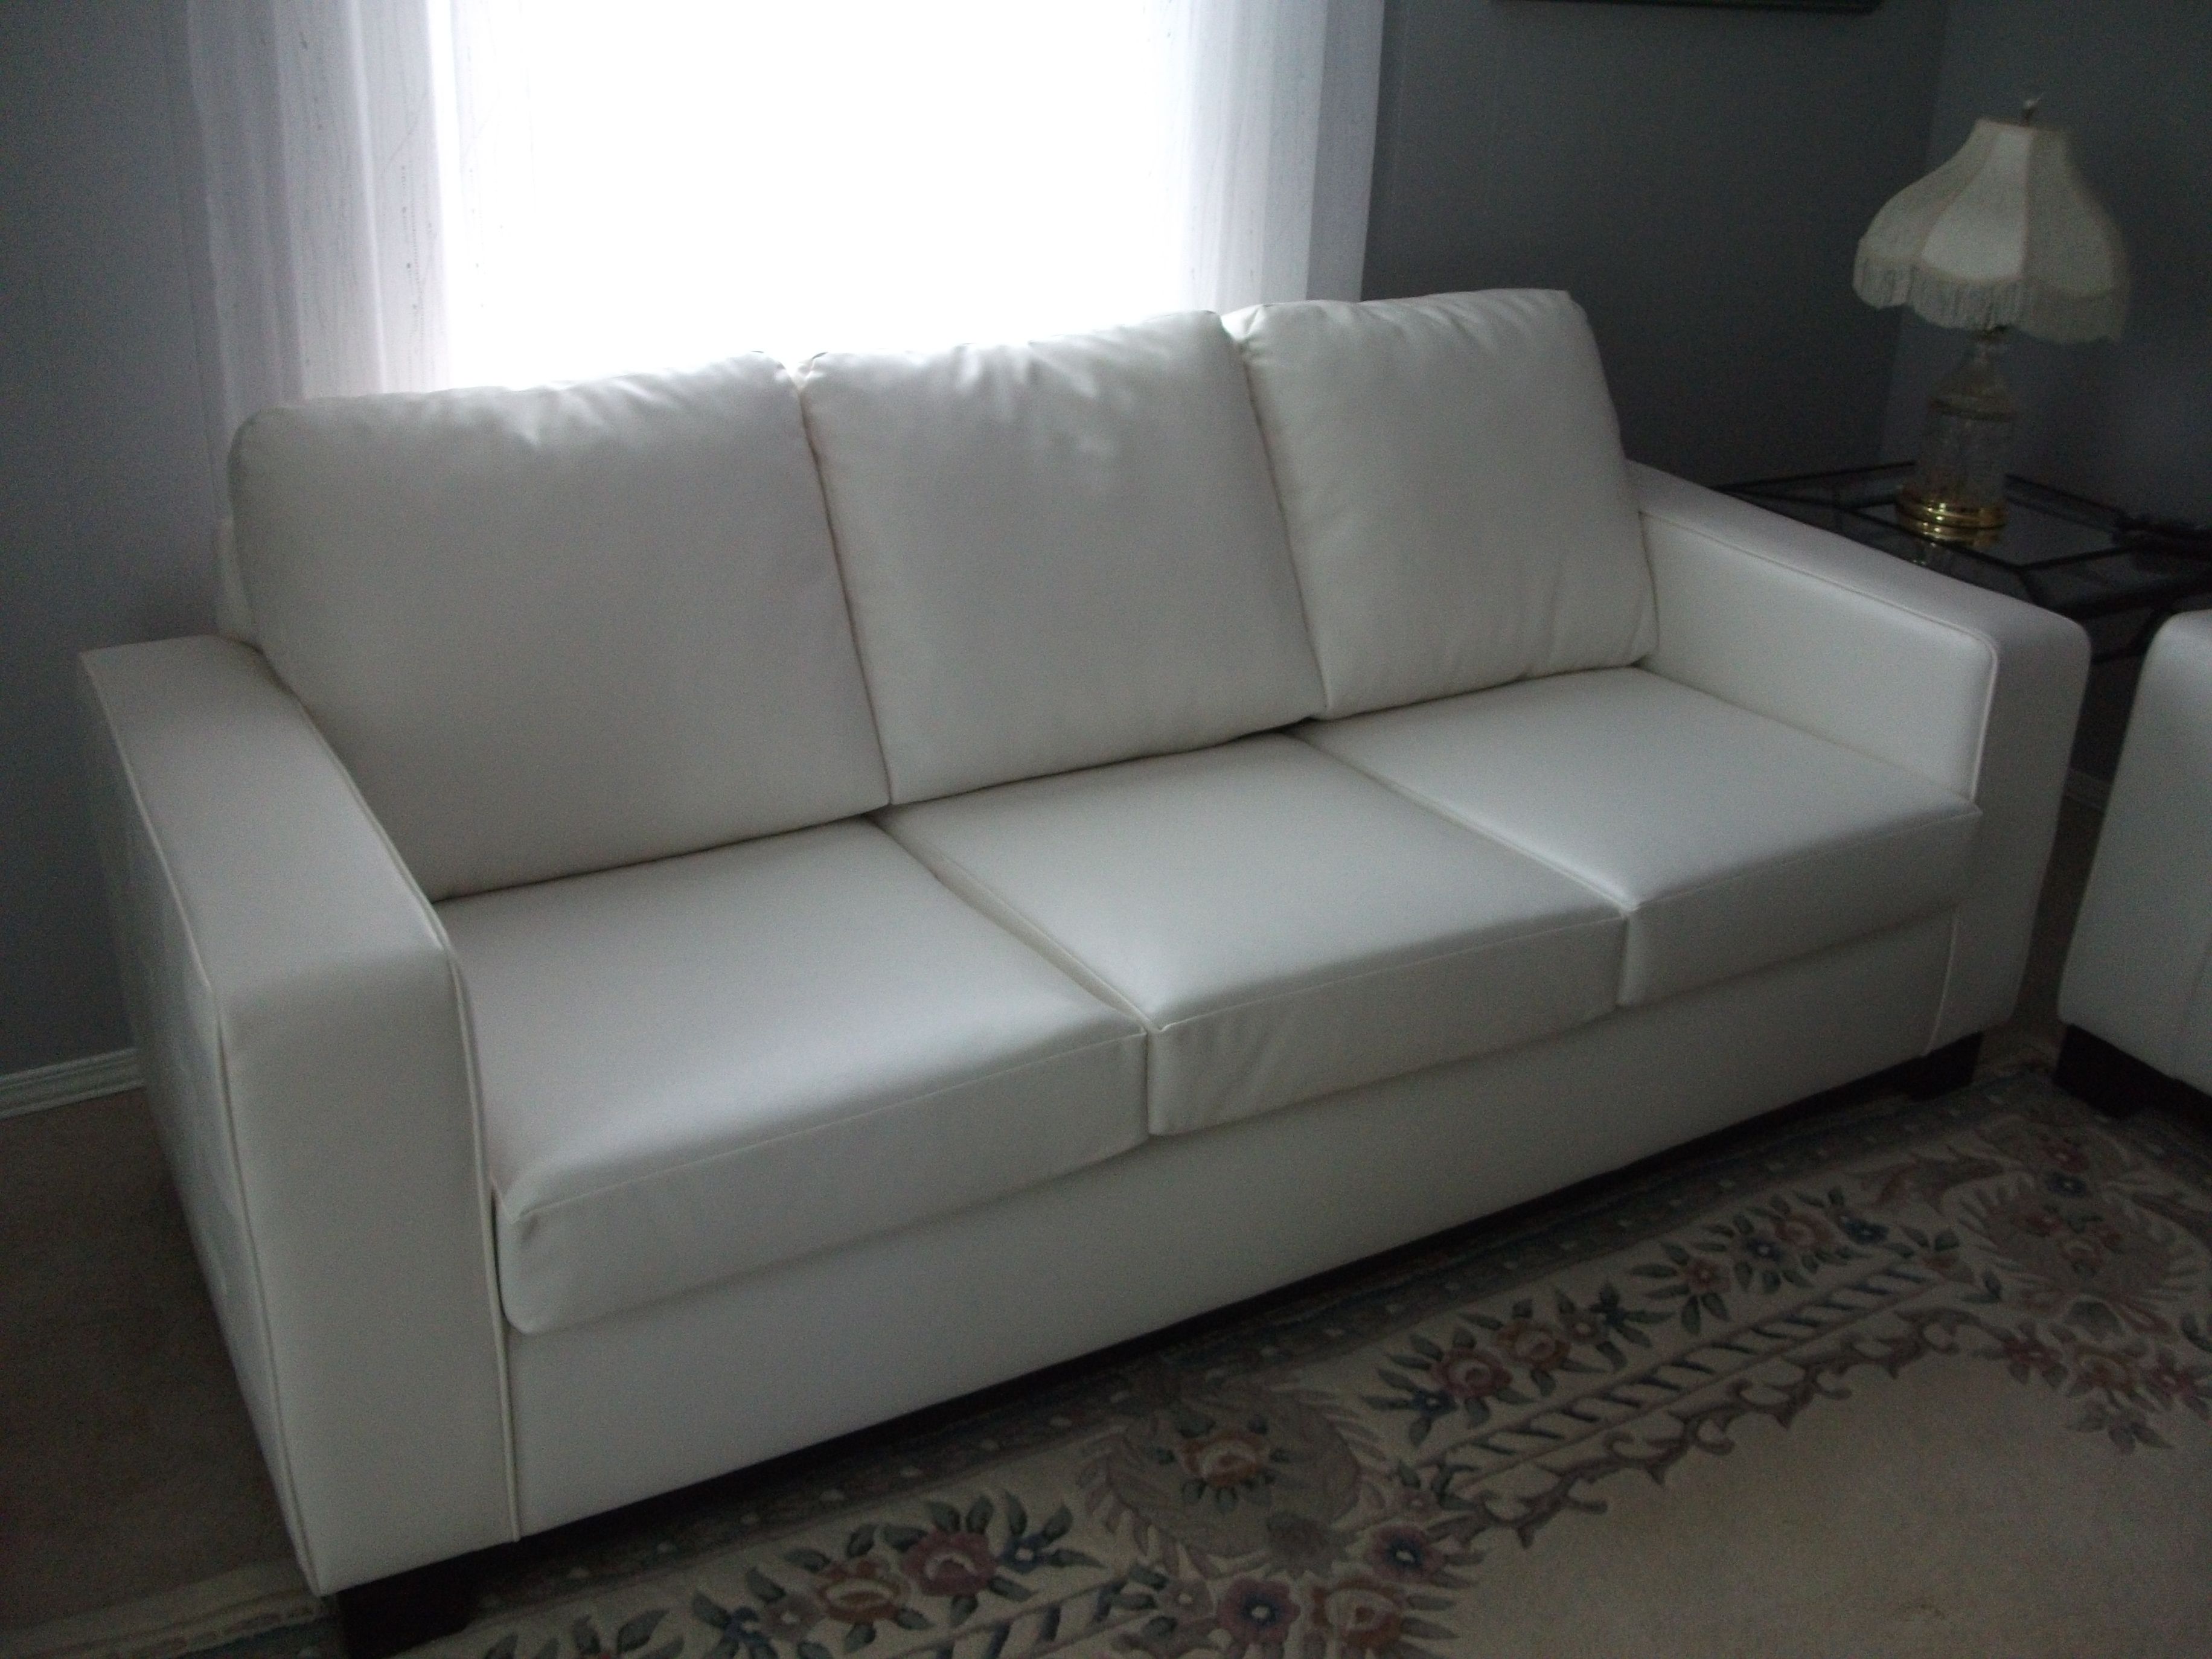 We Do All Types of Sofas, Loveseats, and Couches